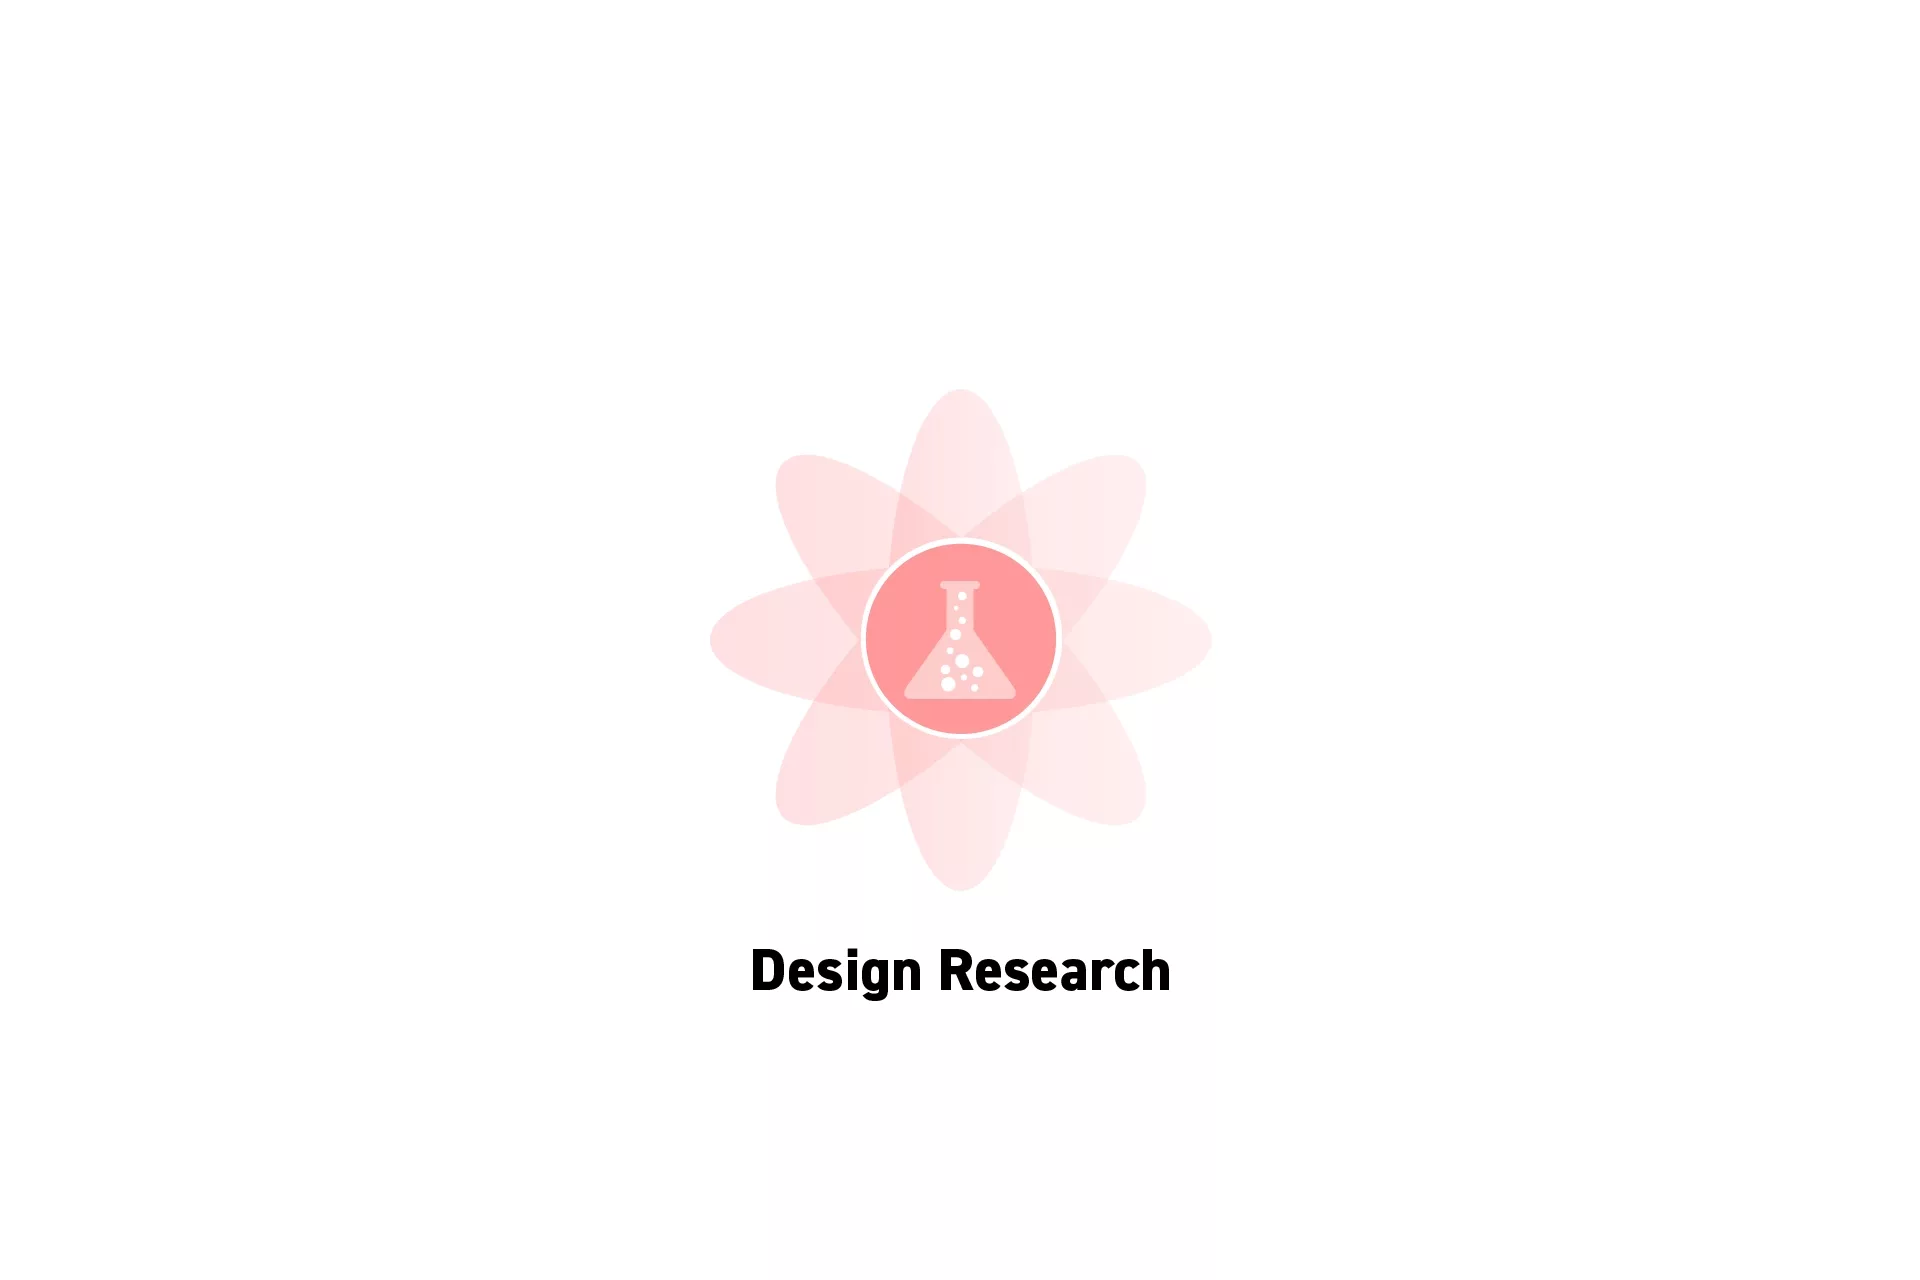 A flower that represents Strategy with the text “Design Research” beneath it.